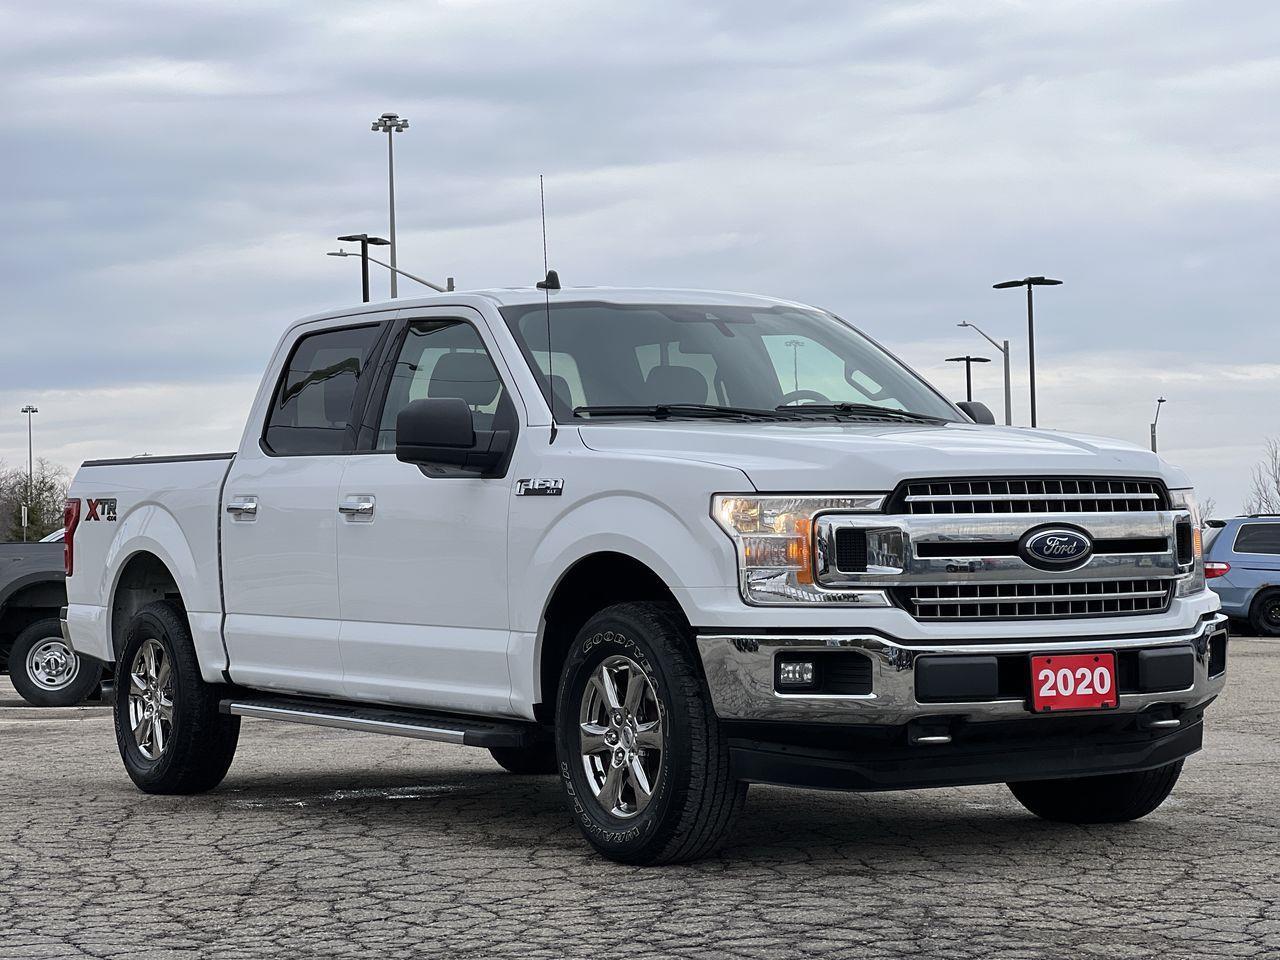 2020 Ford F-150 XLT 300A | XTR PACKAGE | HITCH